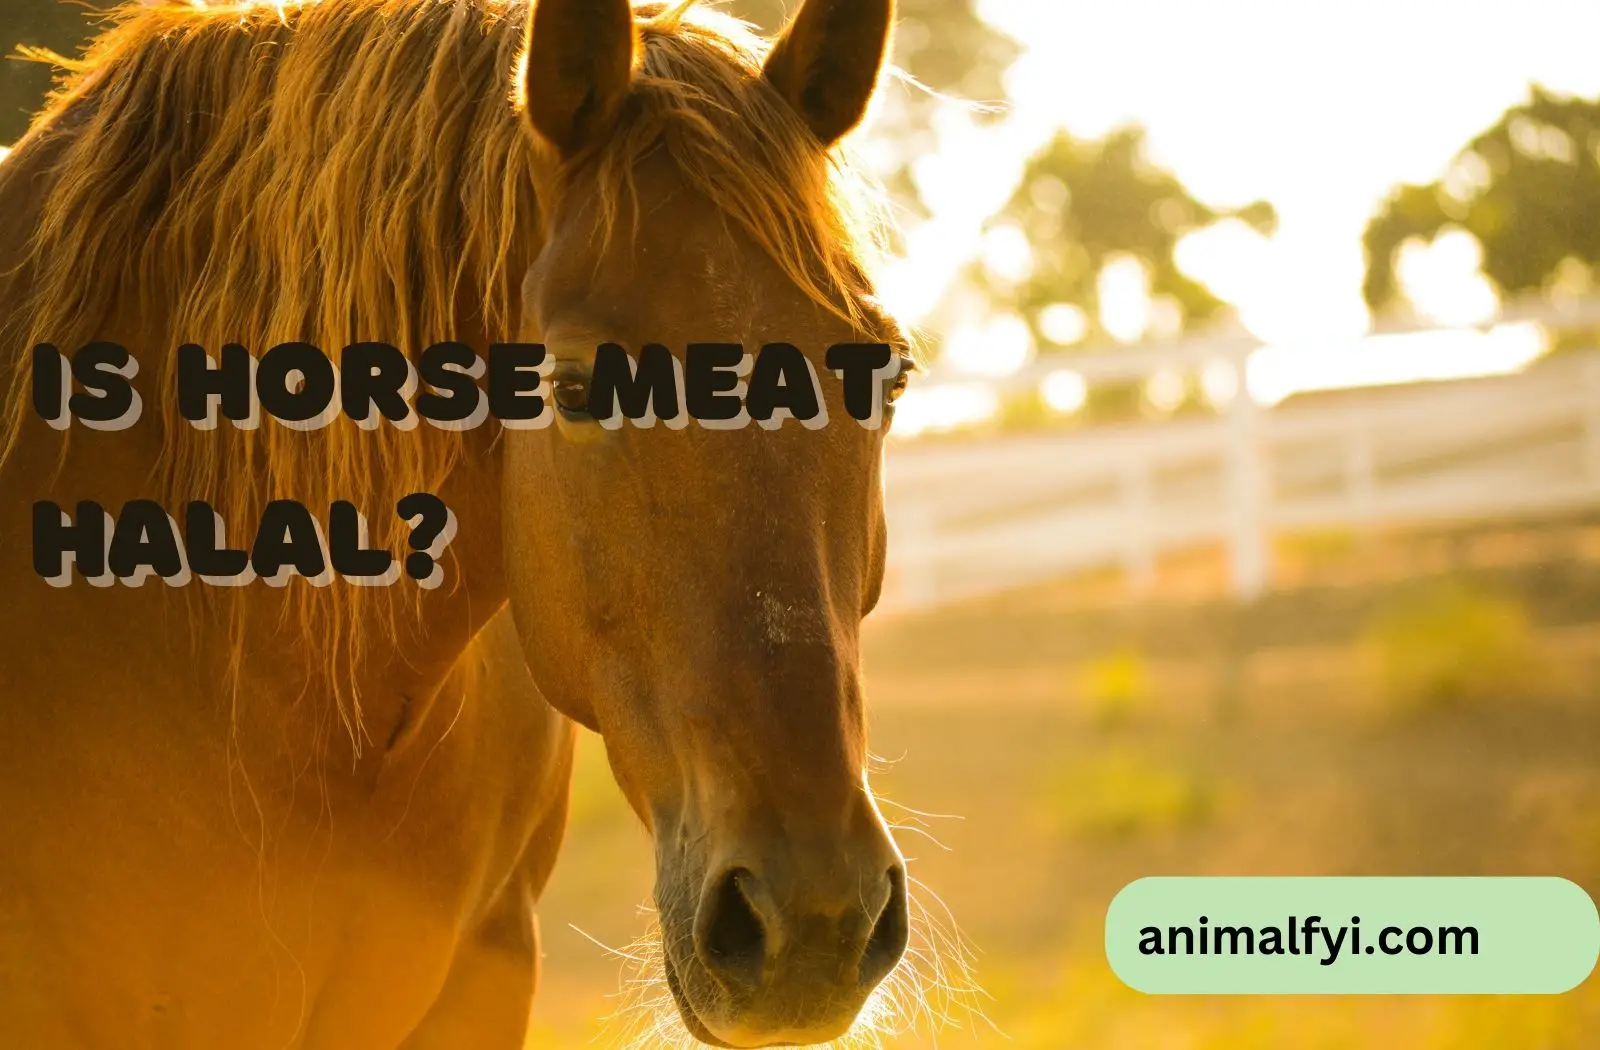 Is Horse Meat Halal?